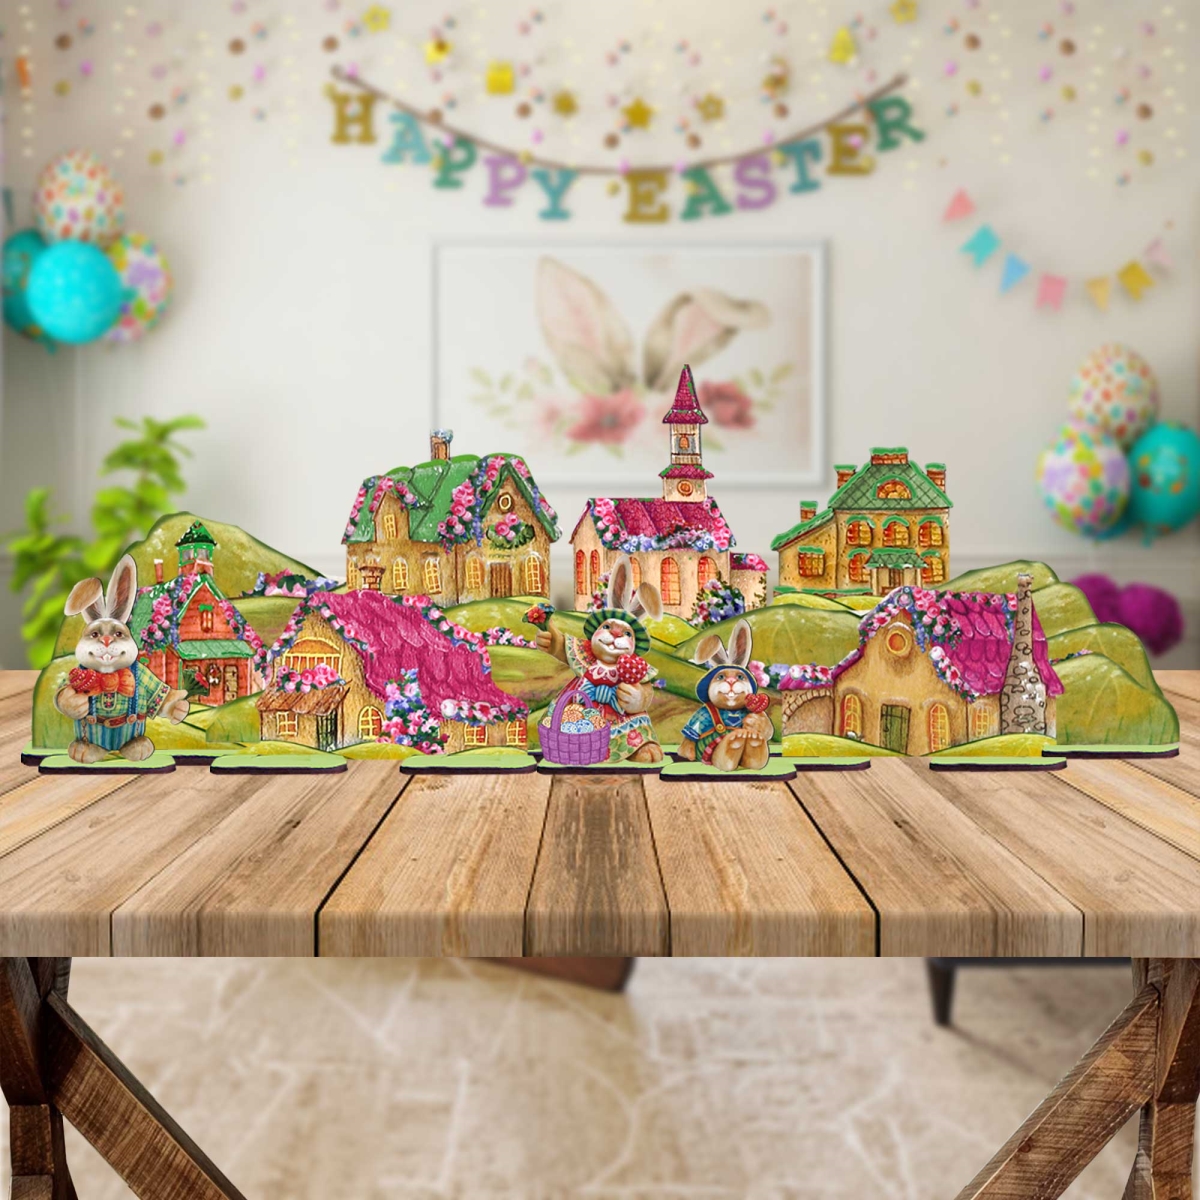 Picture of Designocracy 852730-S12 35 x 11 in. Easter Village Halloween Decor - Set of 12